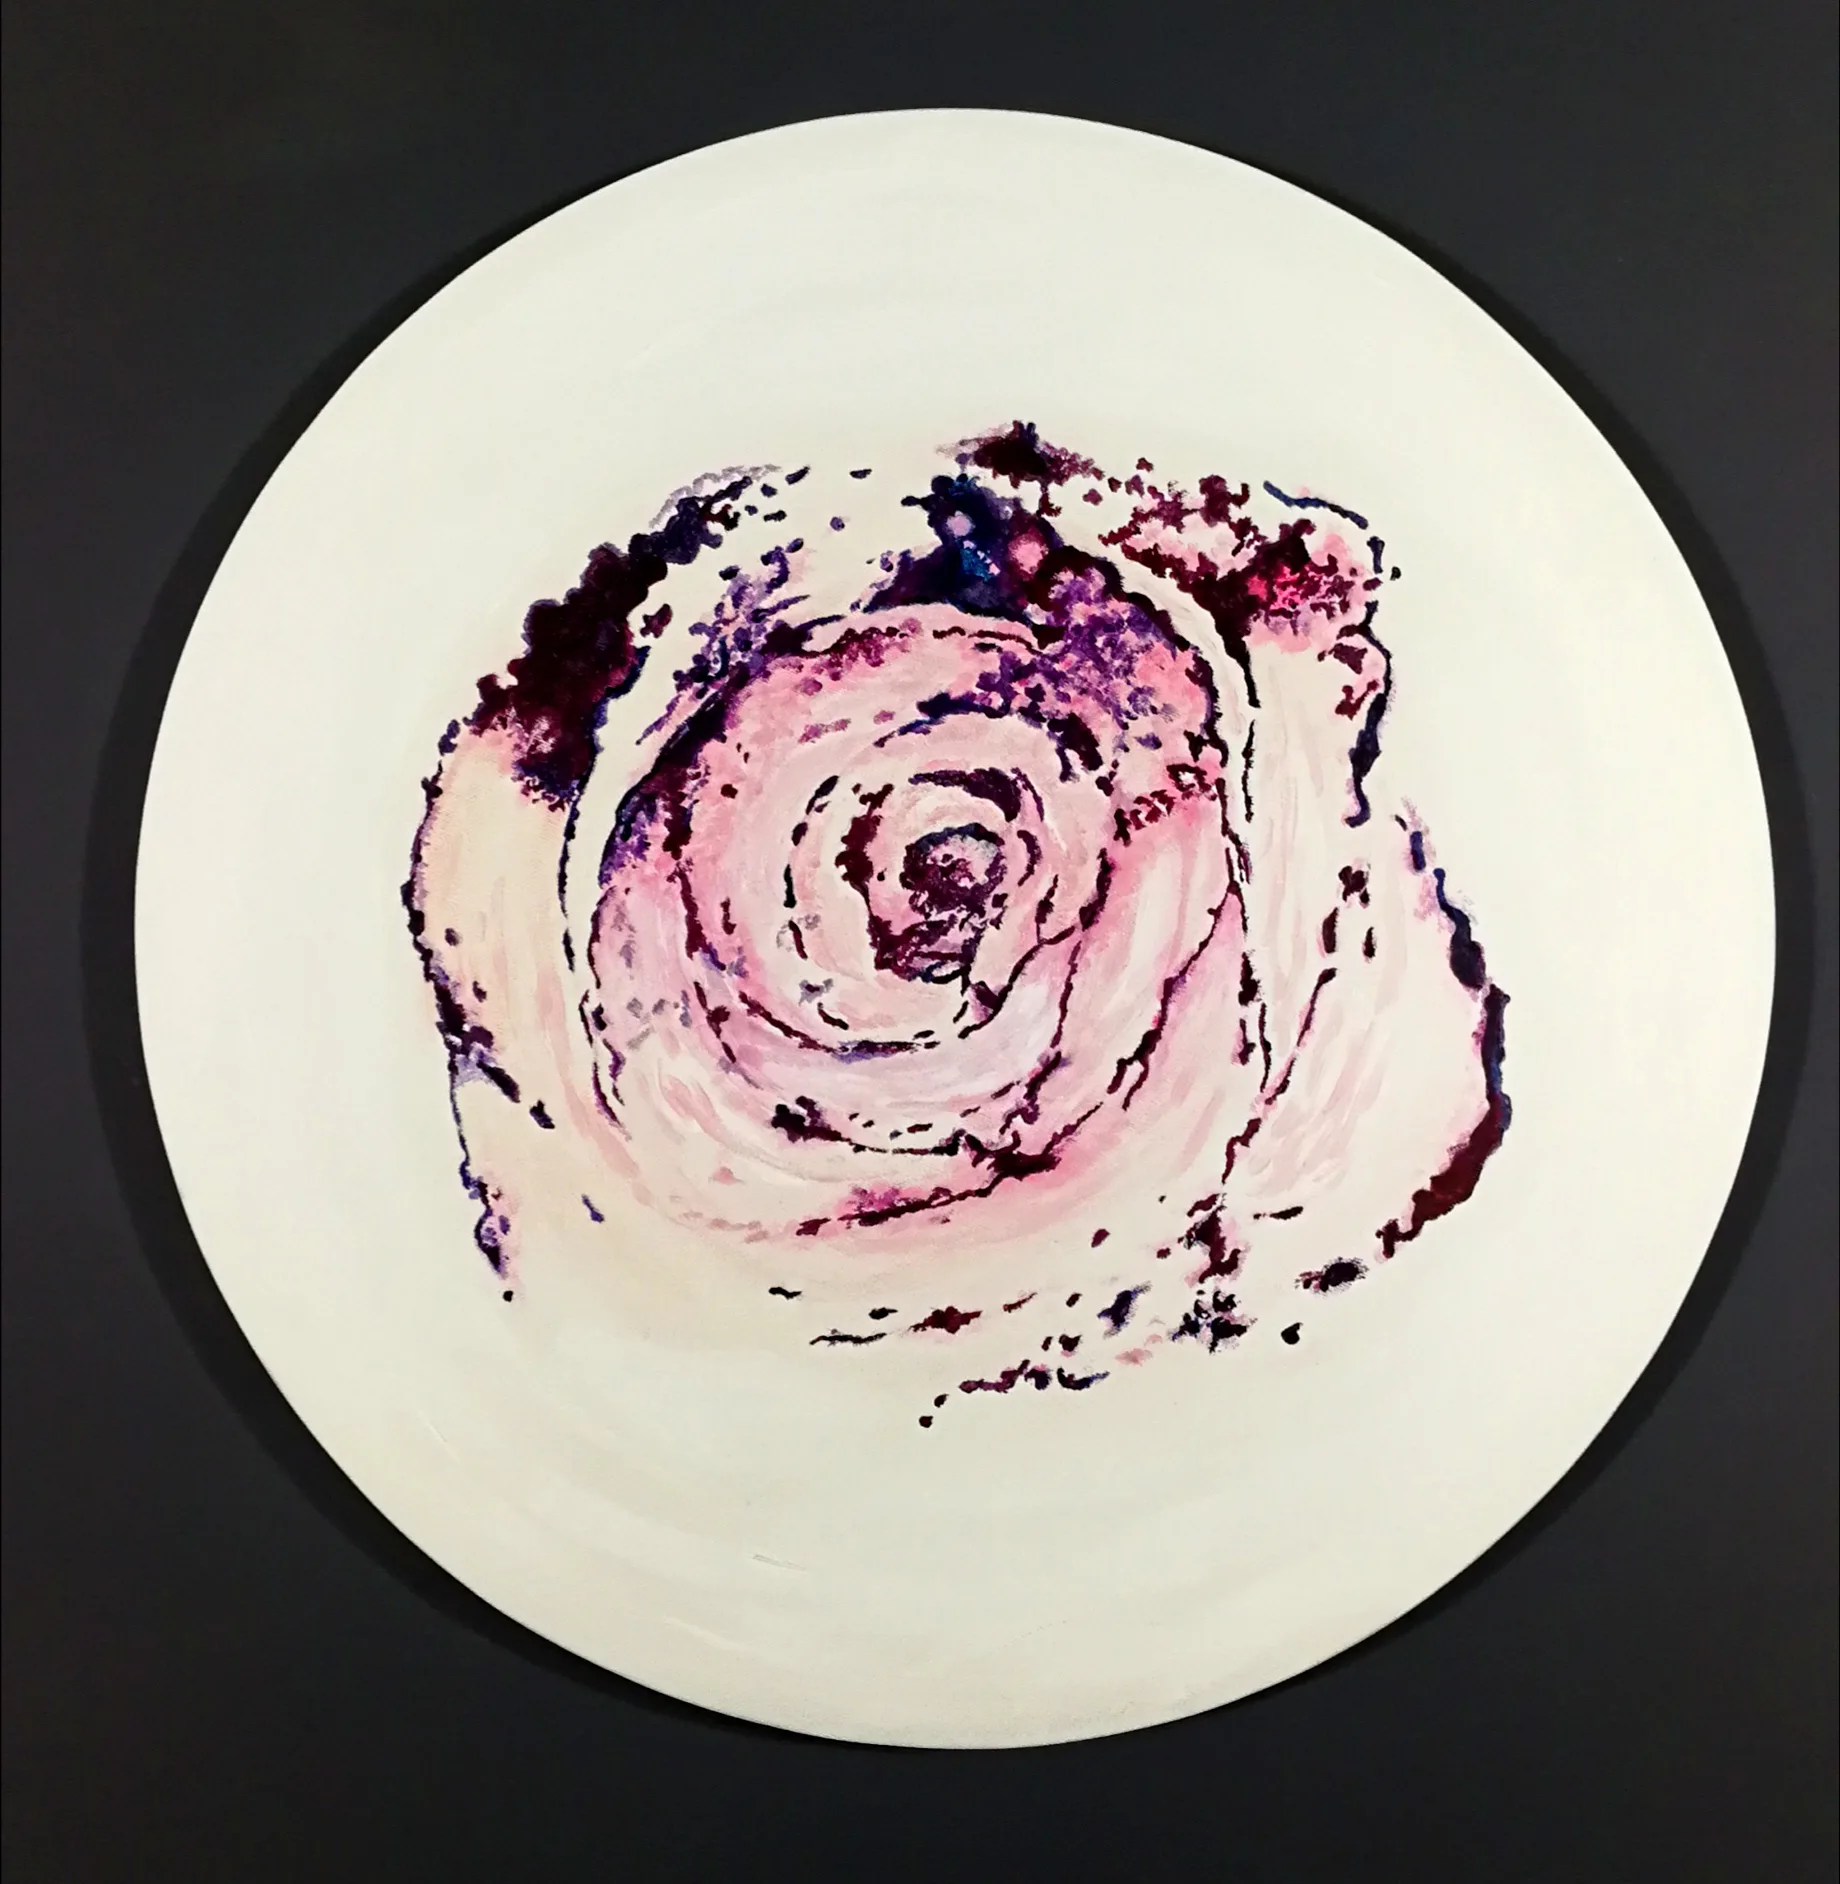 The tondo depicting a dark rose on a white background, with dimensions of 50 cm, made using acrylic on canvas technique